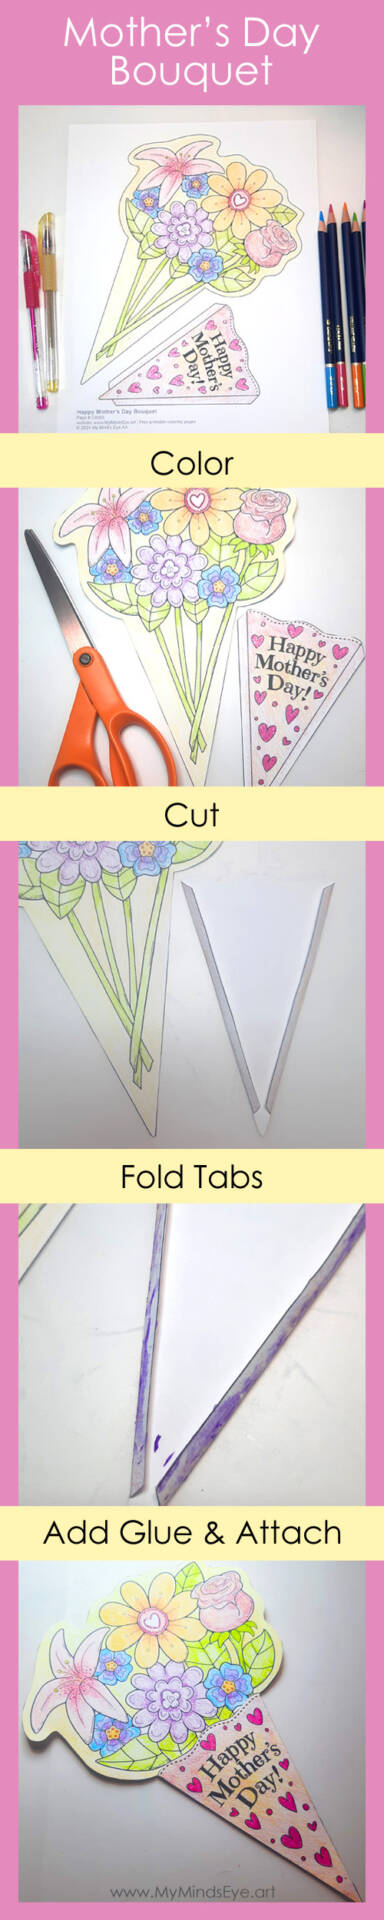 Image of instructions for making a Mother's Day paper flower bouquet.